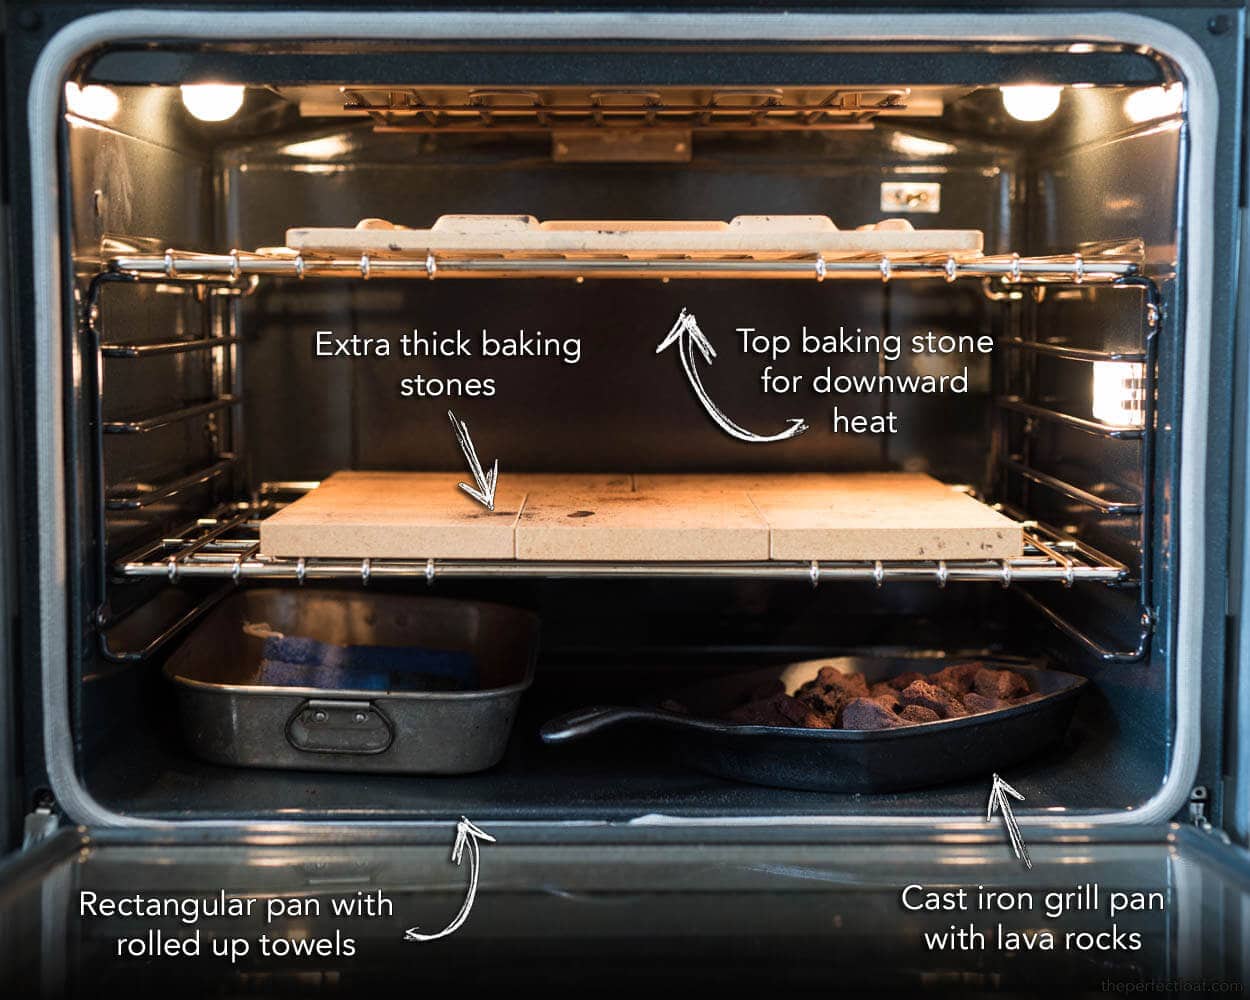 Understanding Your Toaster Oven (A Guide To OTG Baking)